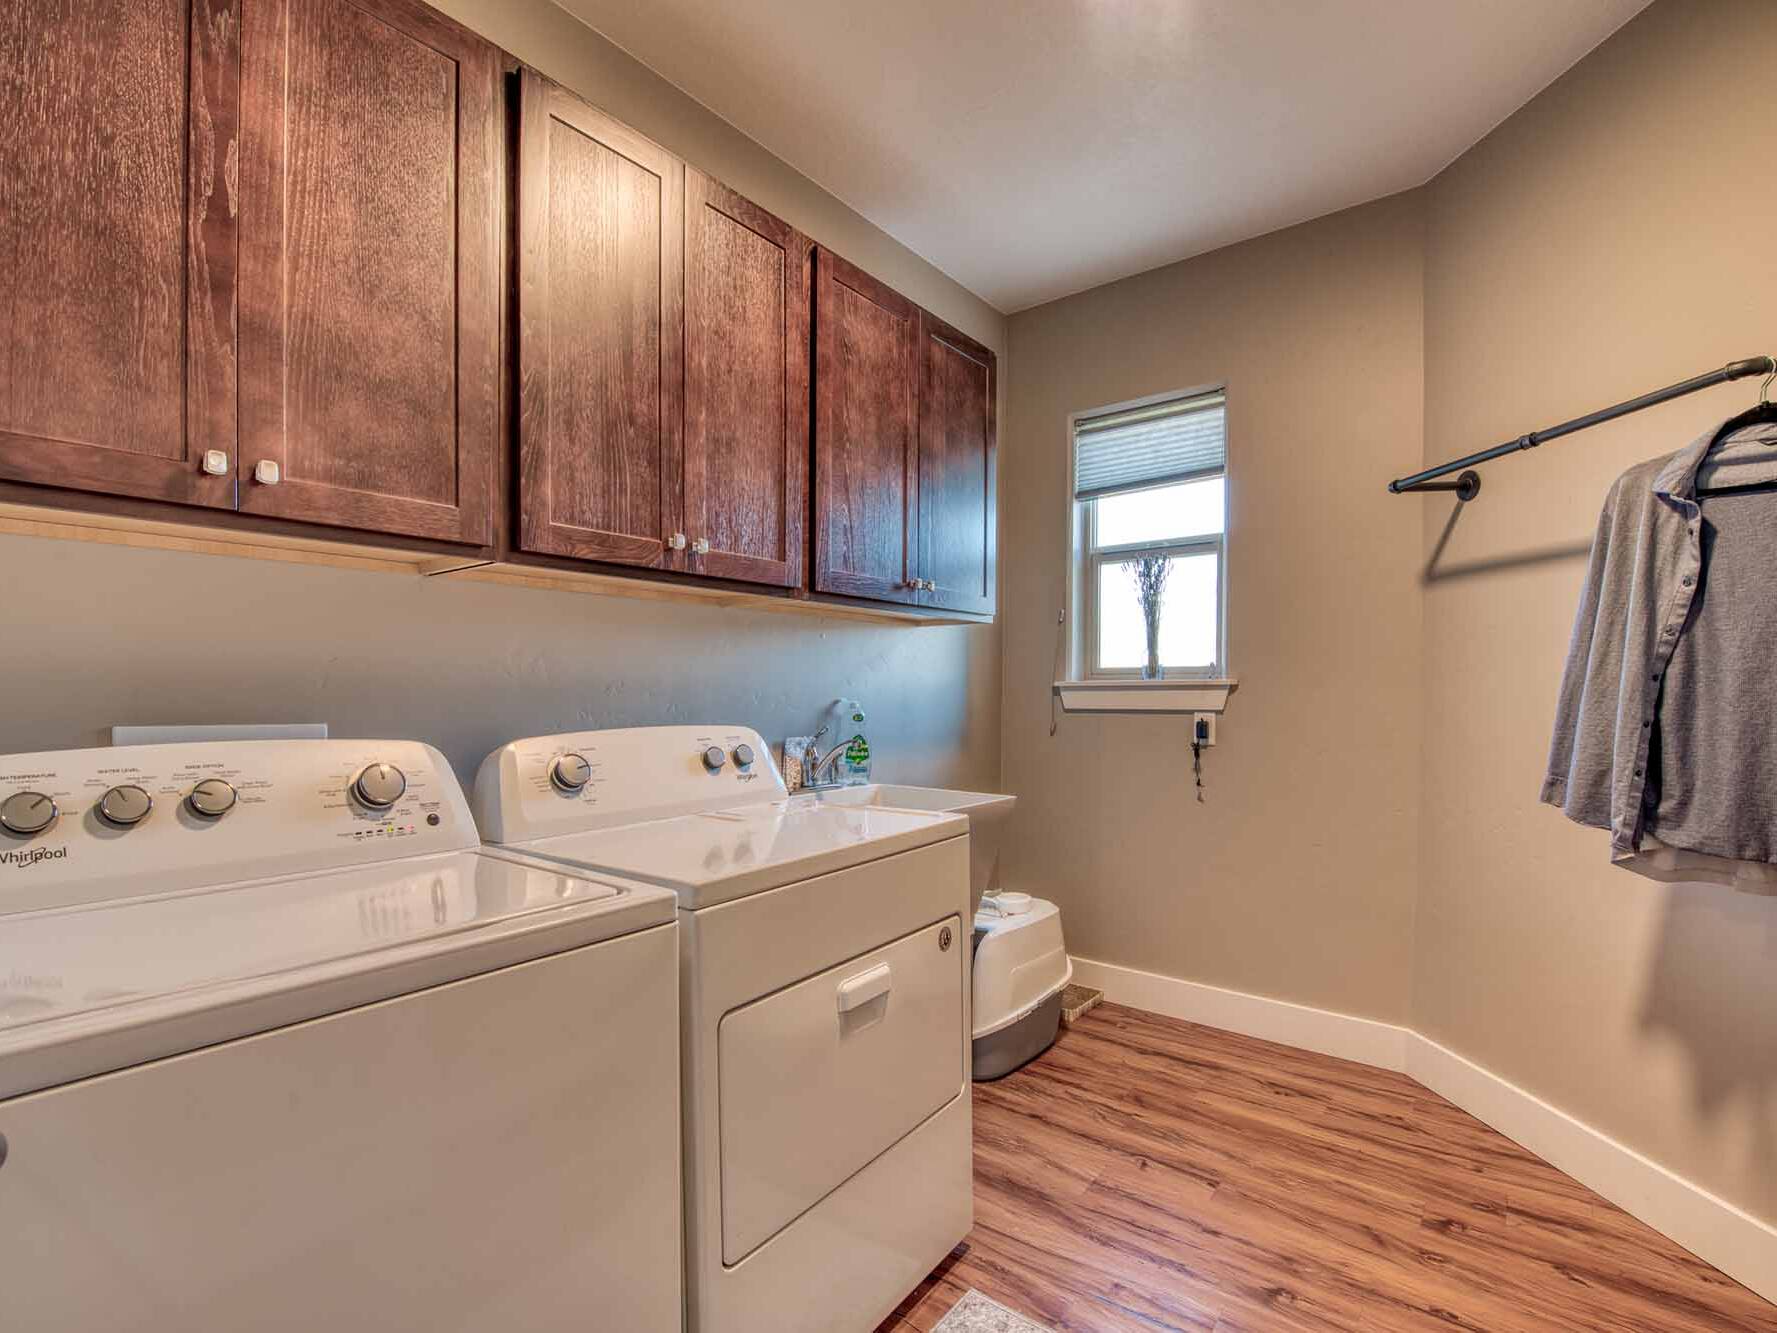 Laundry room in The Copper Creek model home - Built by Big Sky Builder in Florence, MT